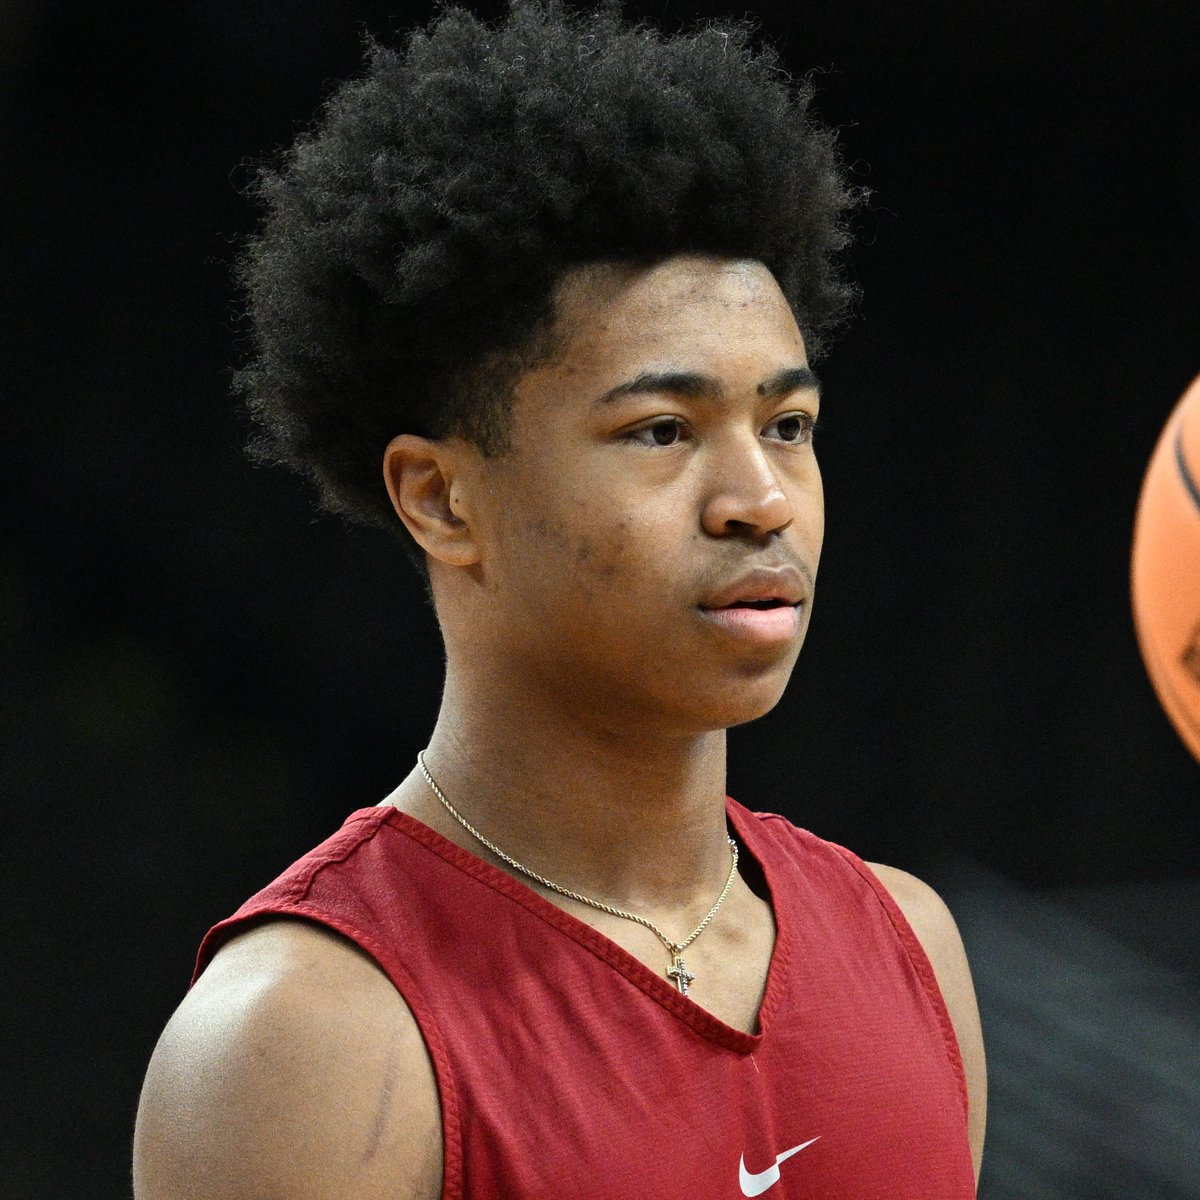 NEWS: Washington State's Jaylen Wells has been invited to attend the NBA Draft Combine, a source told ESPN. Wells, ranked No. 54 among ESPN draft prospects, was initially invited to the G League Elite Camp, making him a surprising omission from the first Combine list.